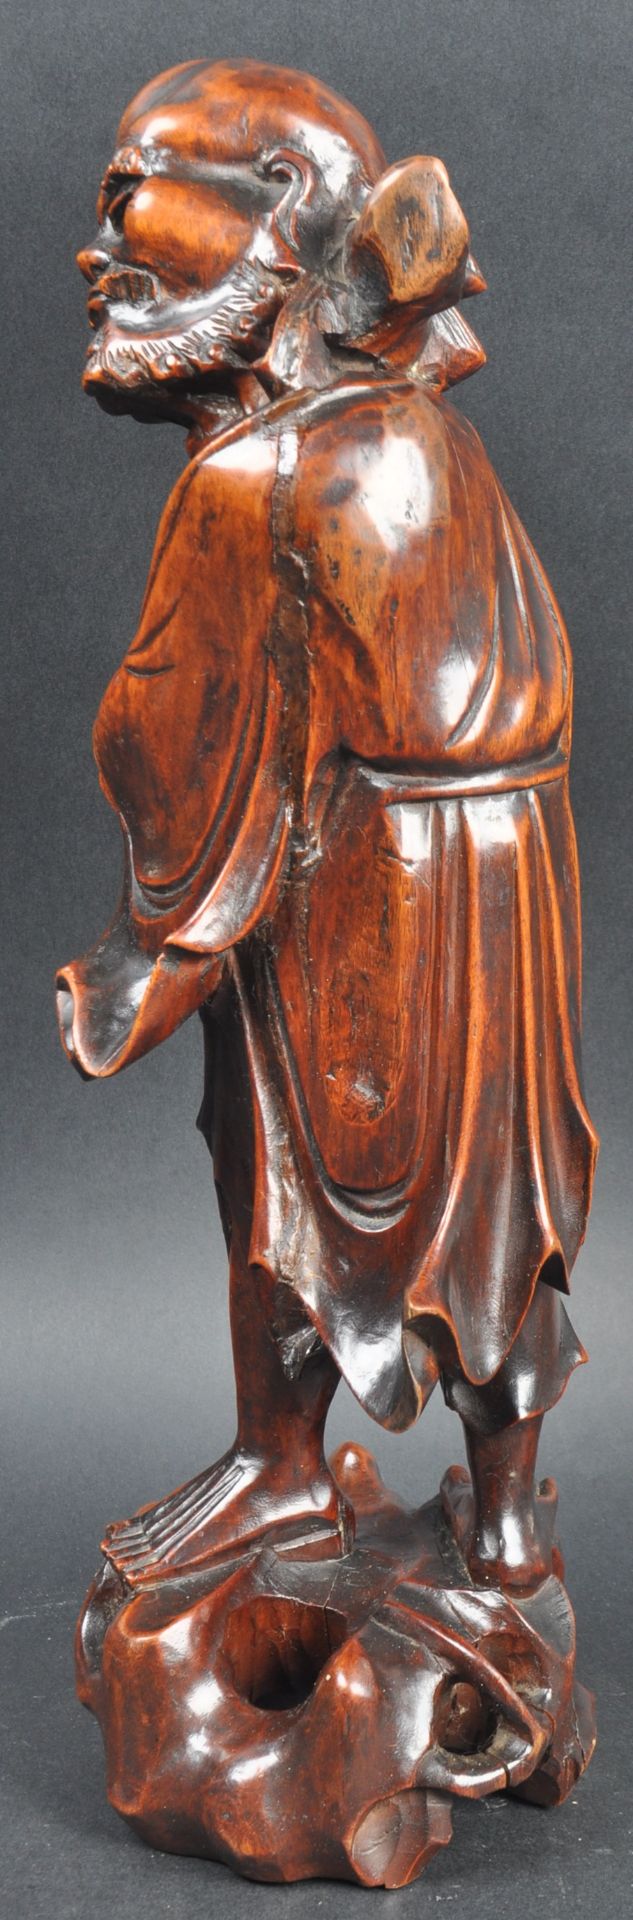 LARGE 19TH CENTURY CHINESE CARVED EMACIATED FIGURE - Image 3 of 6